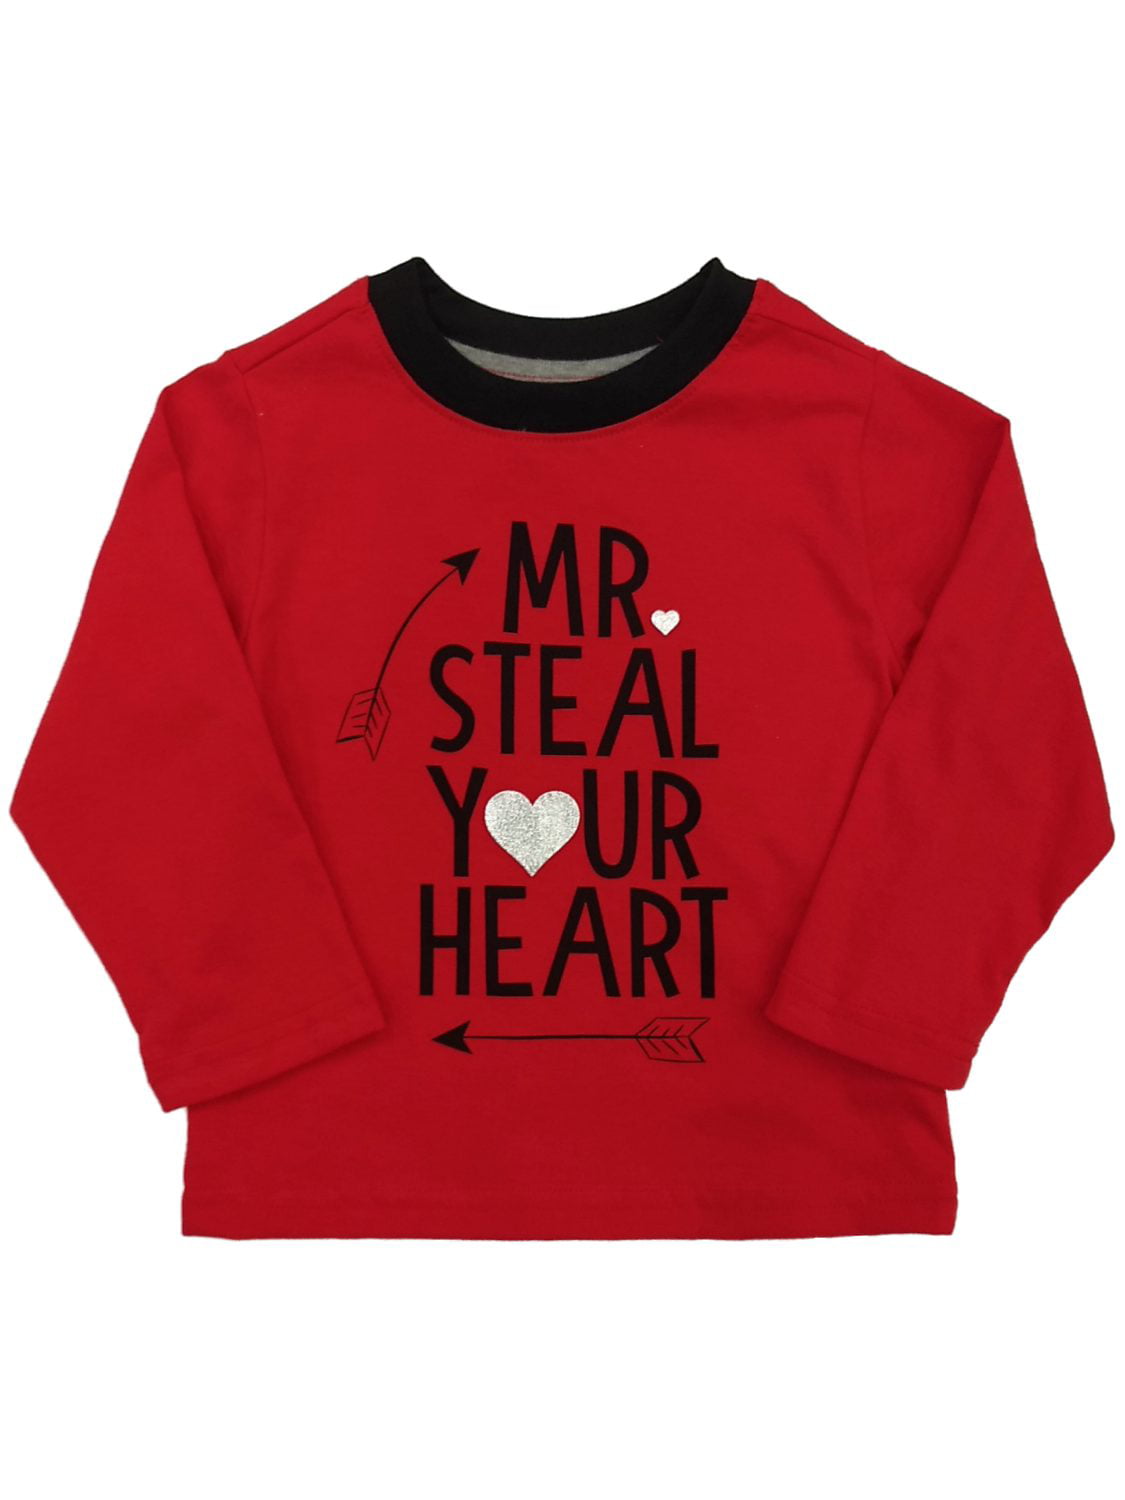 Mister Steal Your Heart Boy\u2019s Valentine\u2019s Day Shirt Matching Sibling Toddler Boys Valentine\u2019s Day Shirt Baby Boy Valentine\u2019s Day Shirt